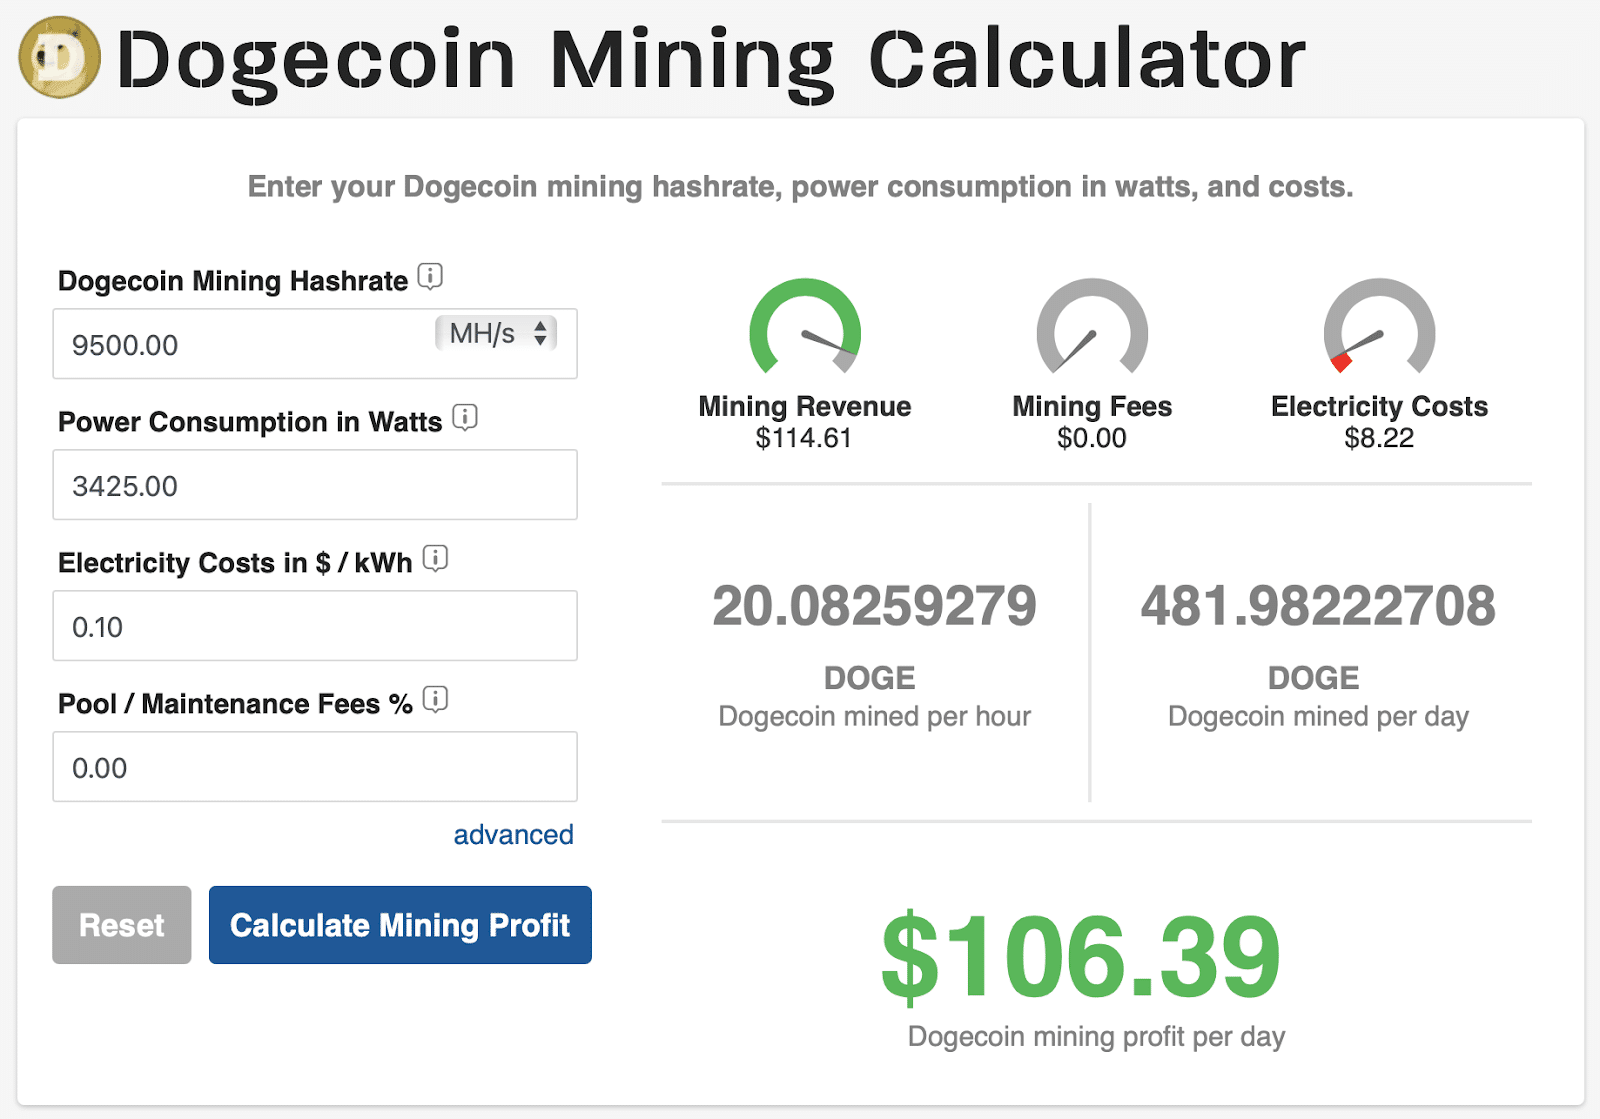 How to Mine Dogecoin in in 3 Steps